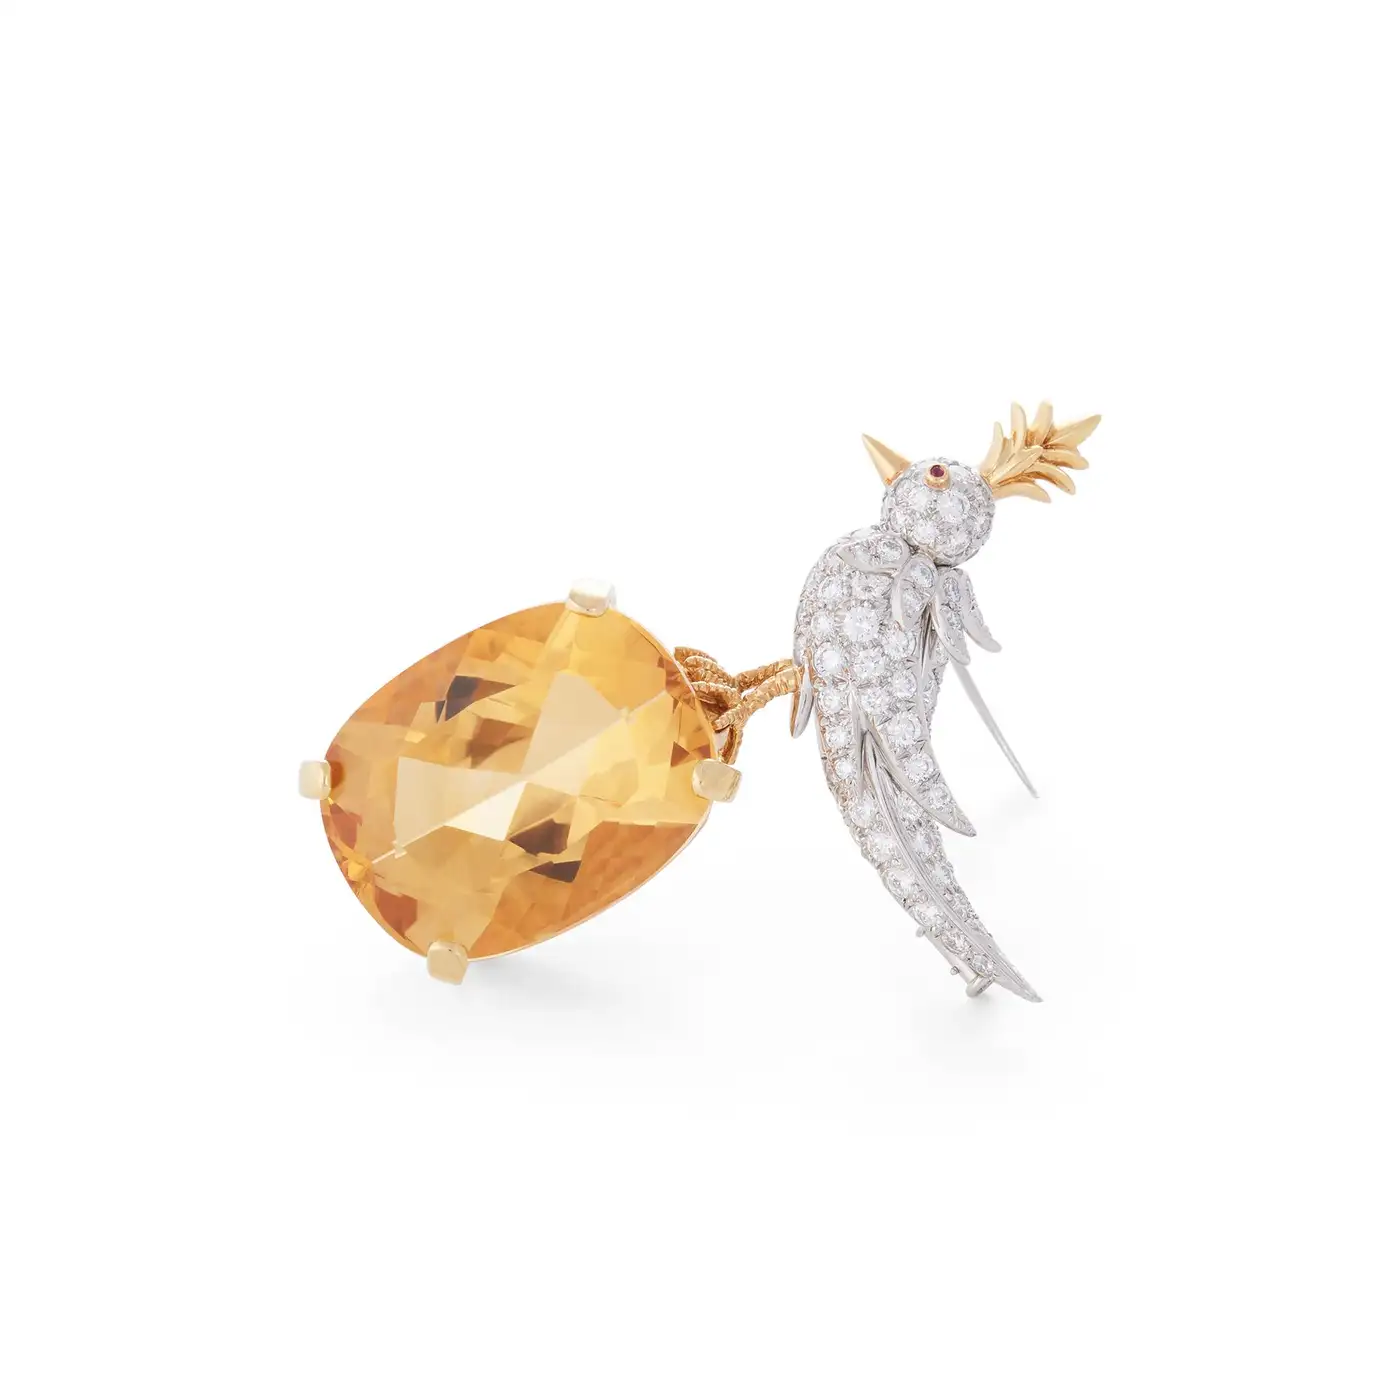 Bird-on-a-Rock-Citrine-and-Diamond-Brooch-Jean-Schlumberger-for-Tiffany-Co-6-1.webp